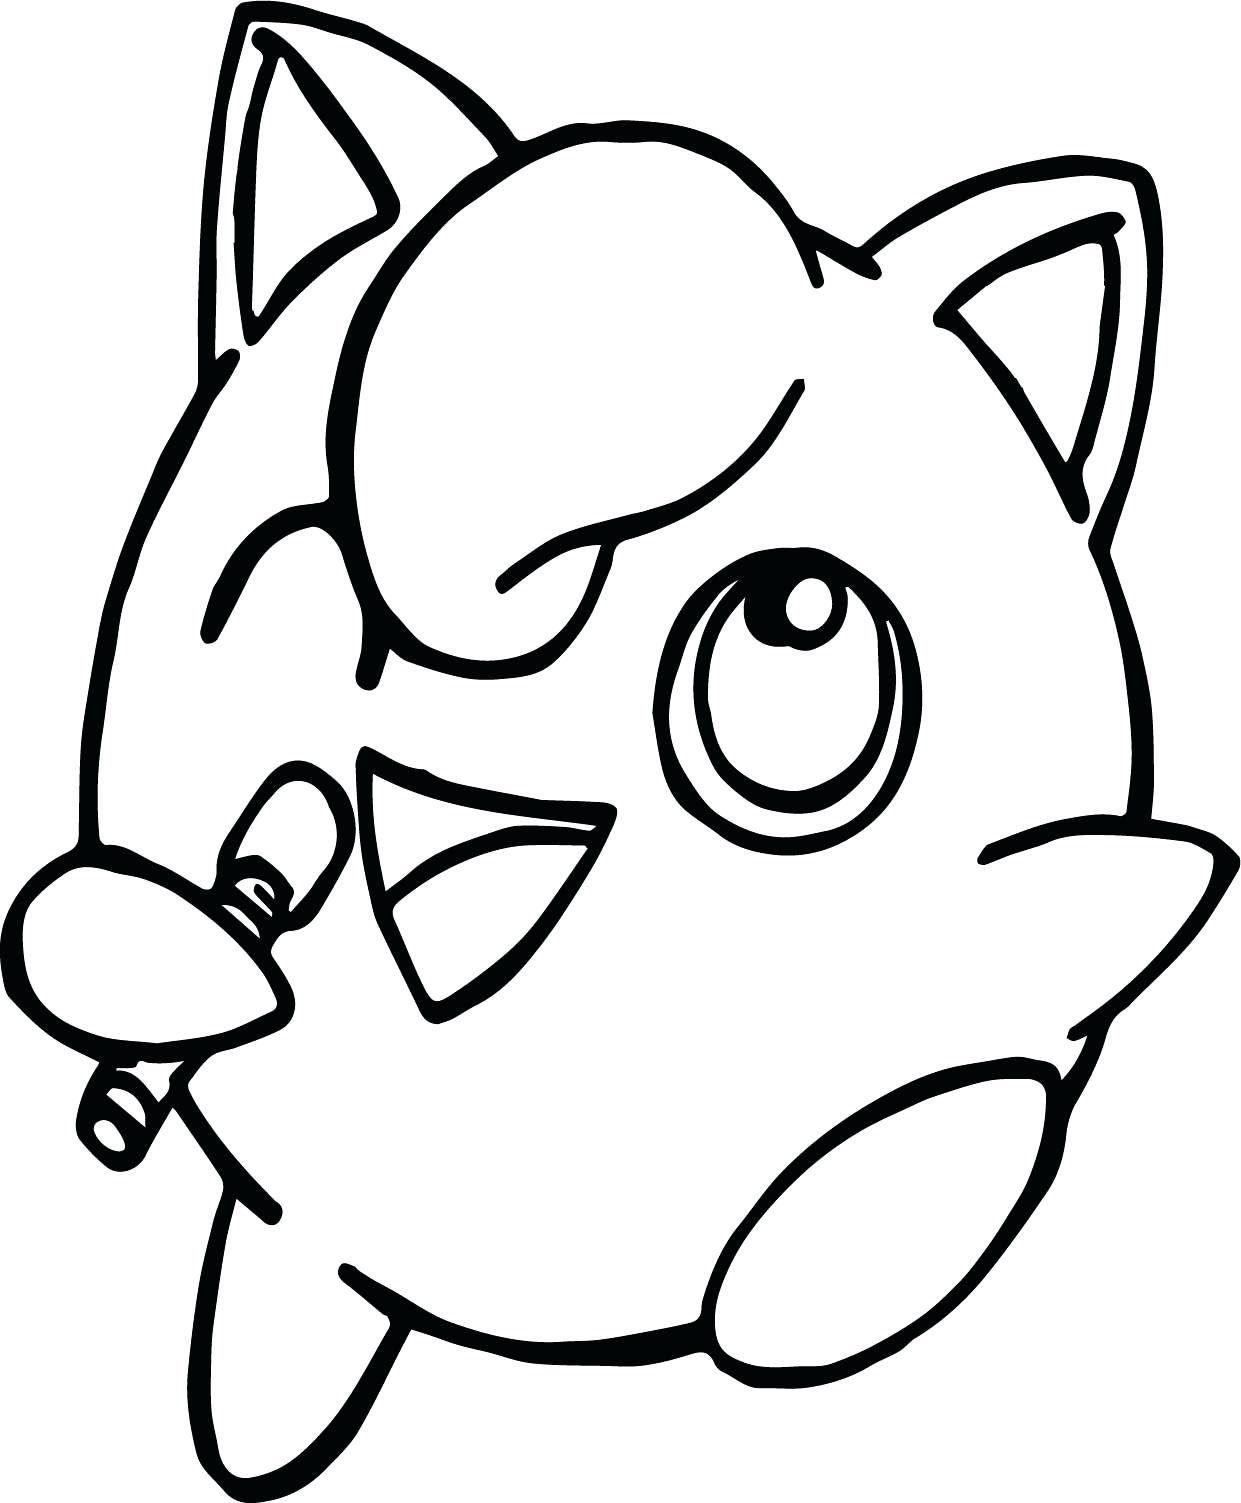 Jigglypuff Coloring Page at GetColorings.com | Free printable colorings